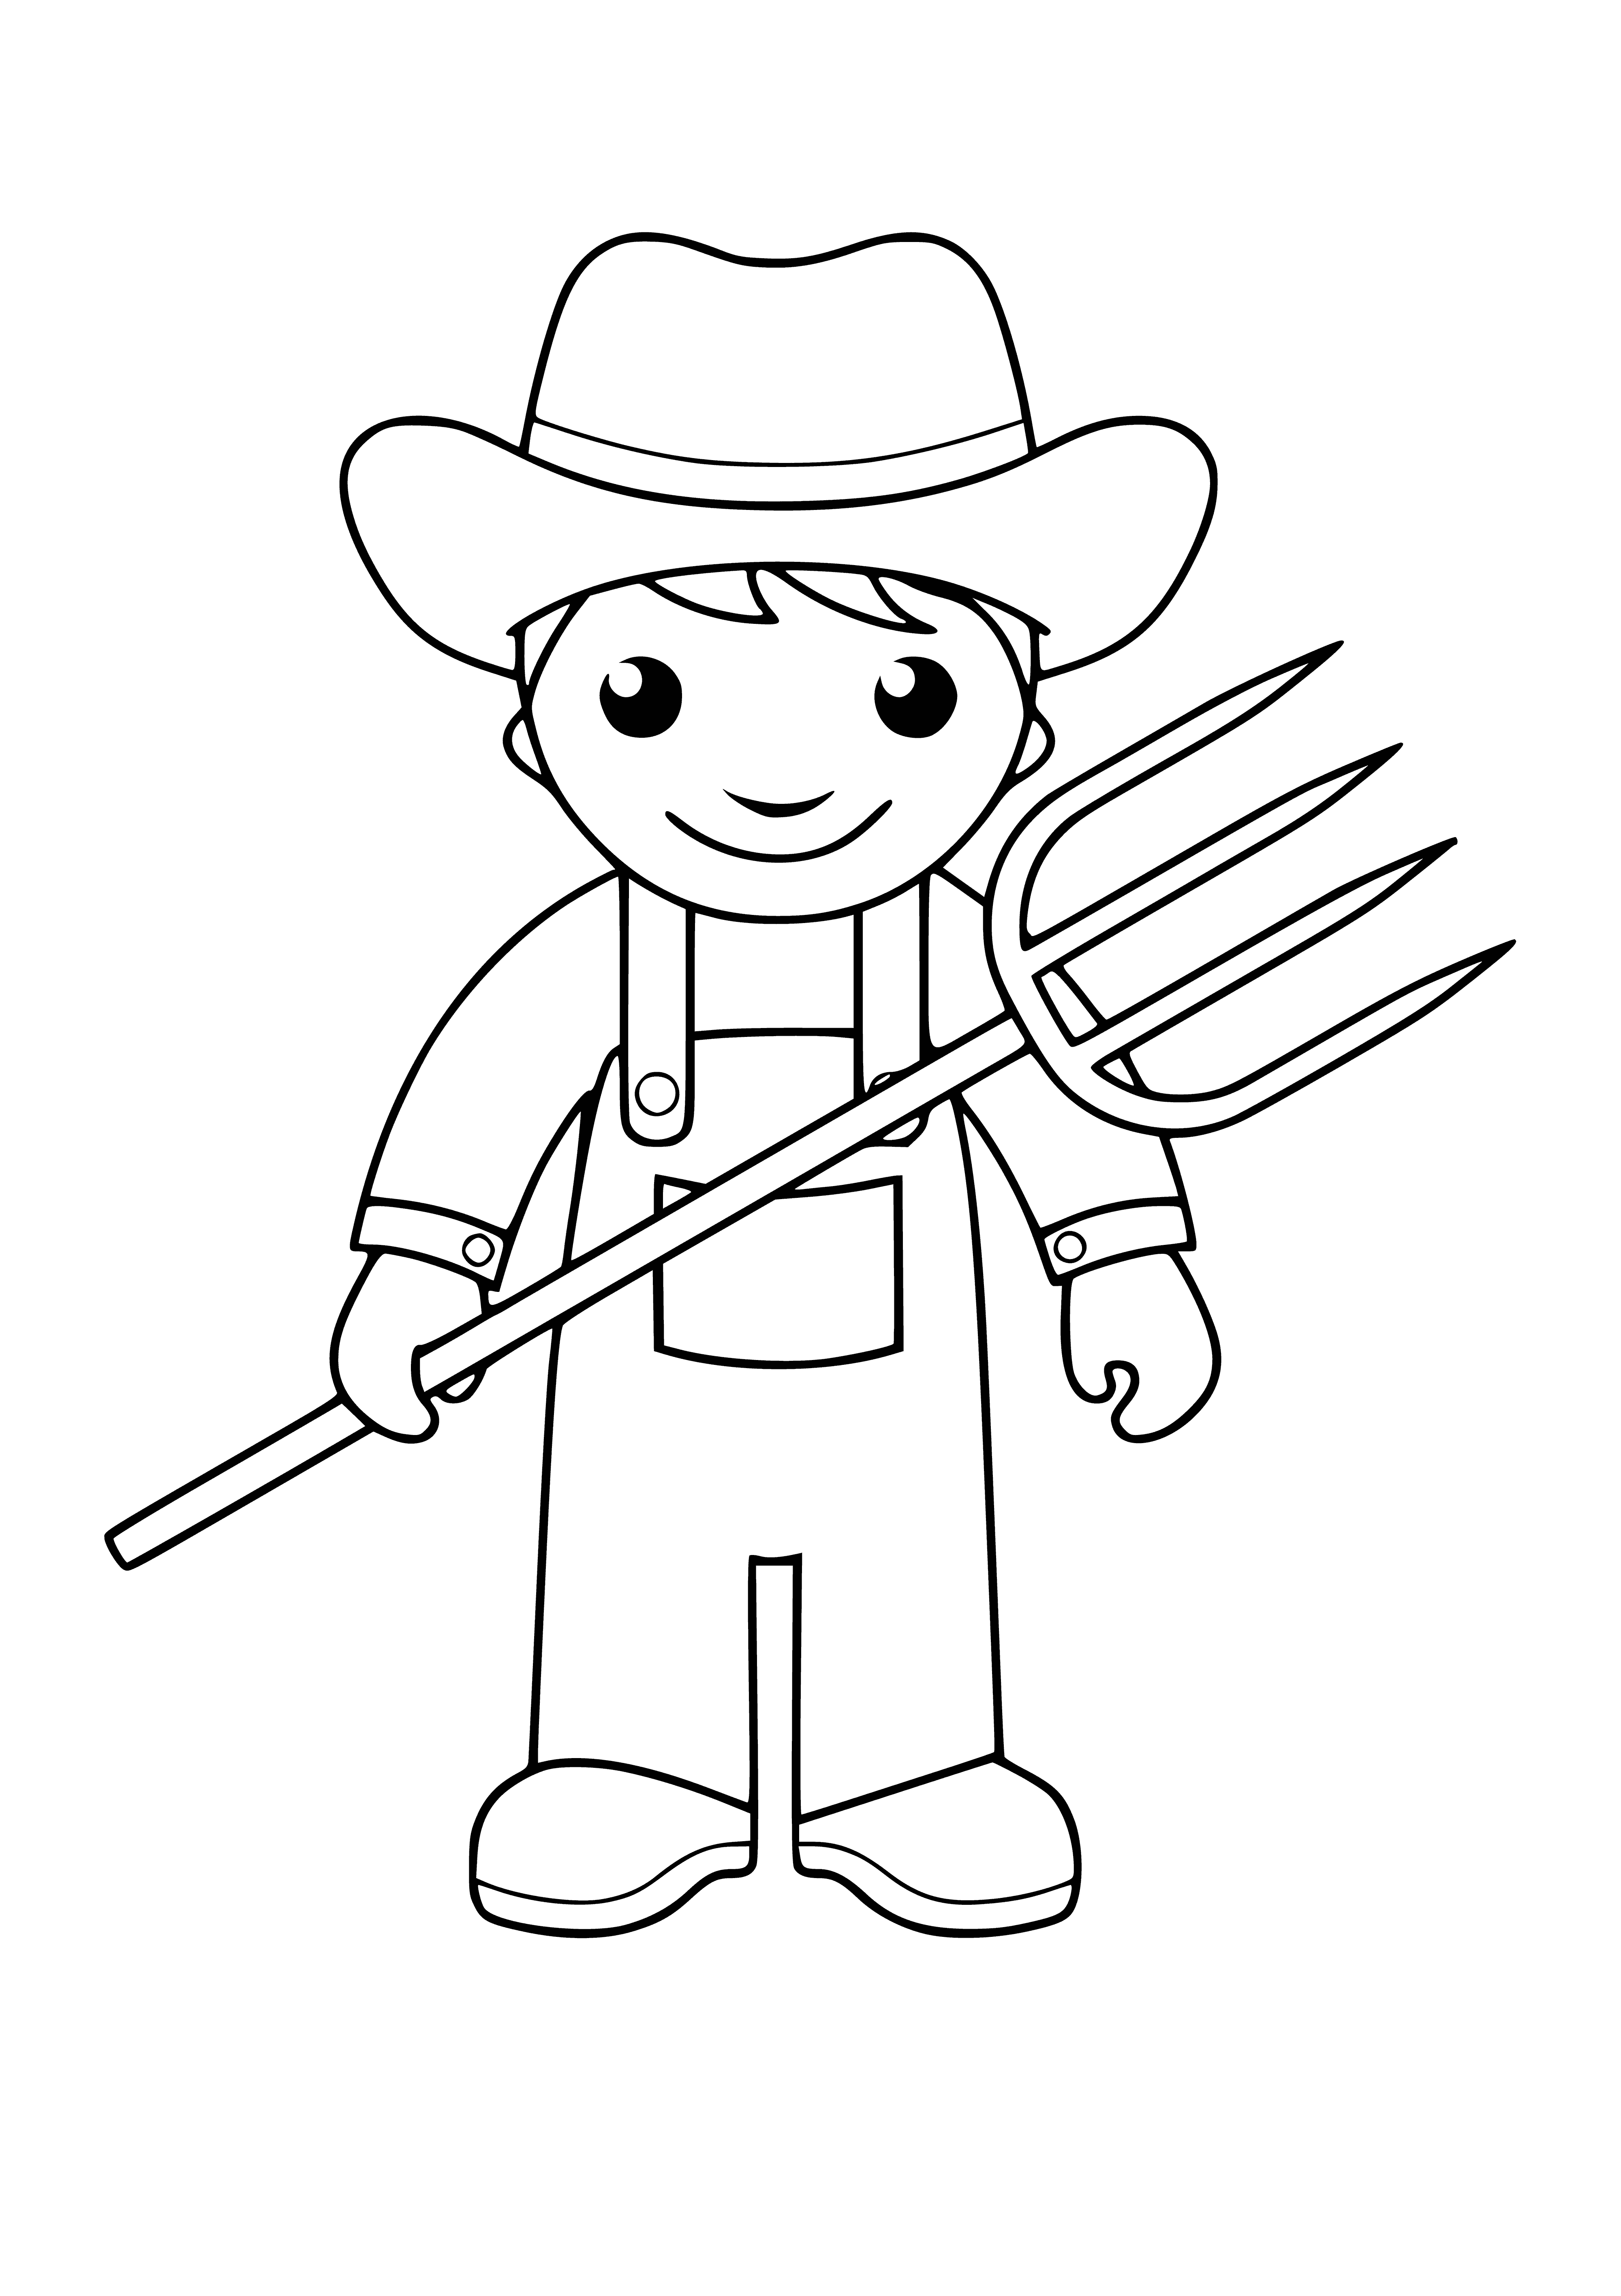 coloring page: Farmer in field wearing hat and plaid shirt holding pitchfork with trees in background.